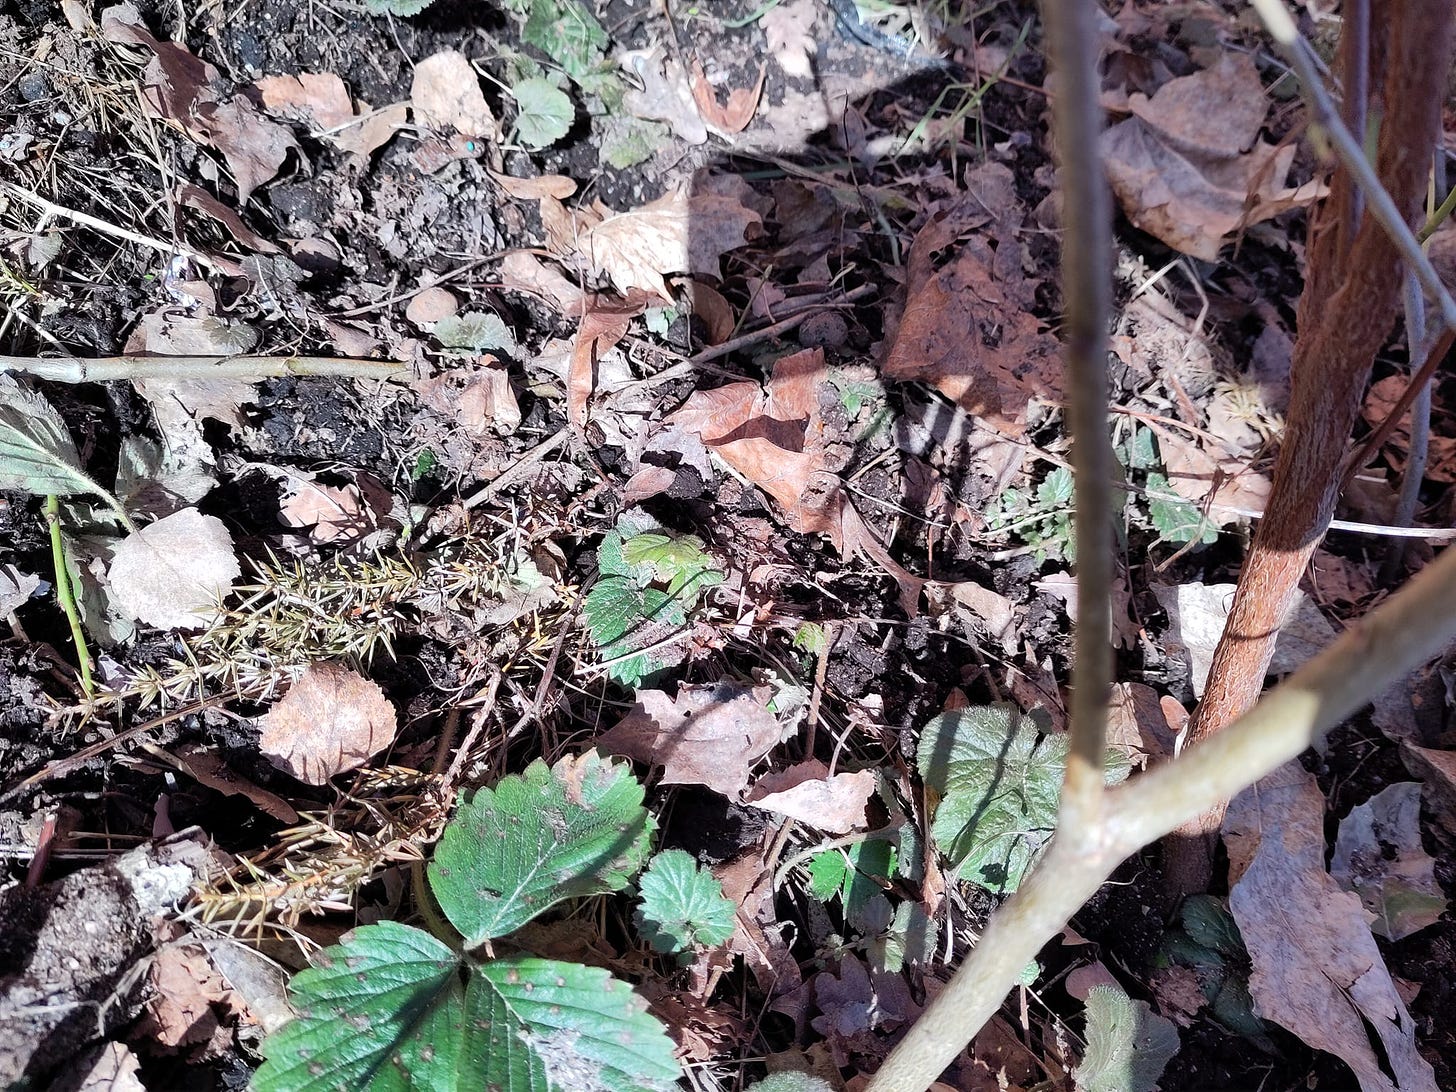 Some dusty strawberry plants growing under a cover of dead leaves and old grit and gravel